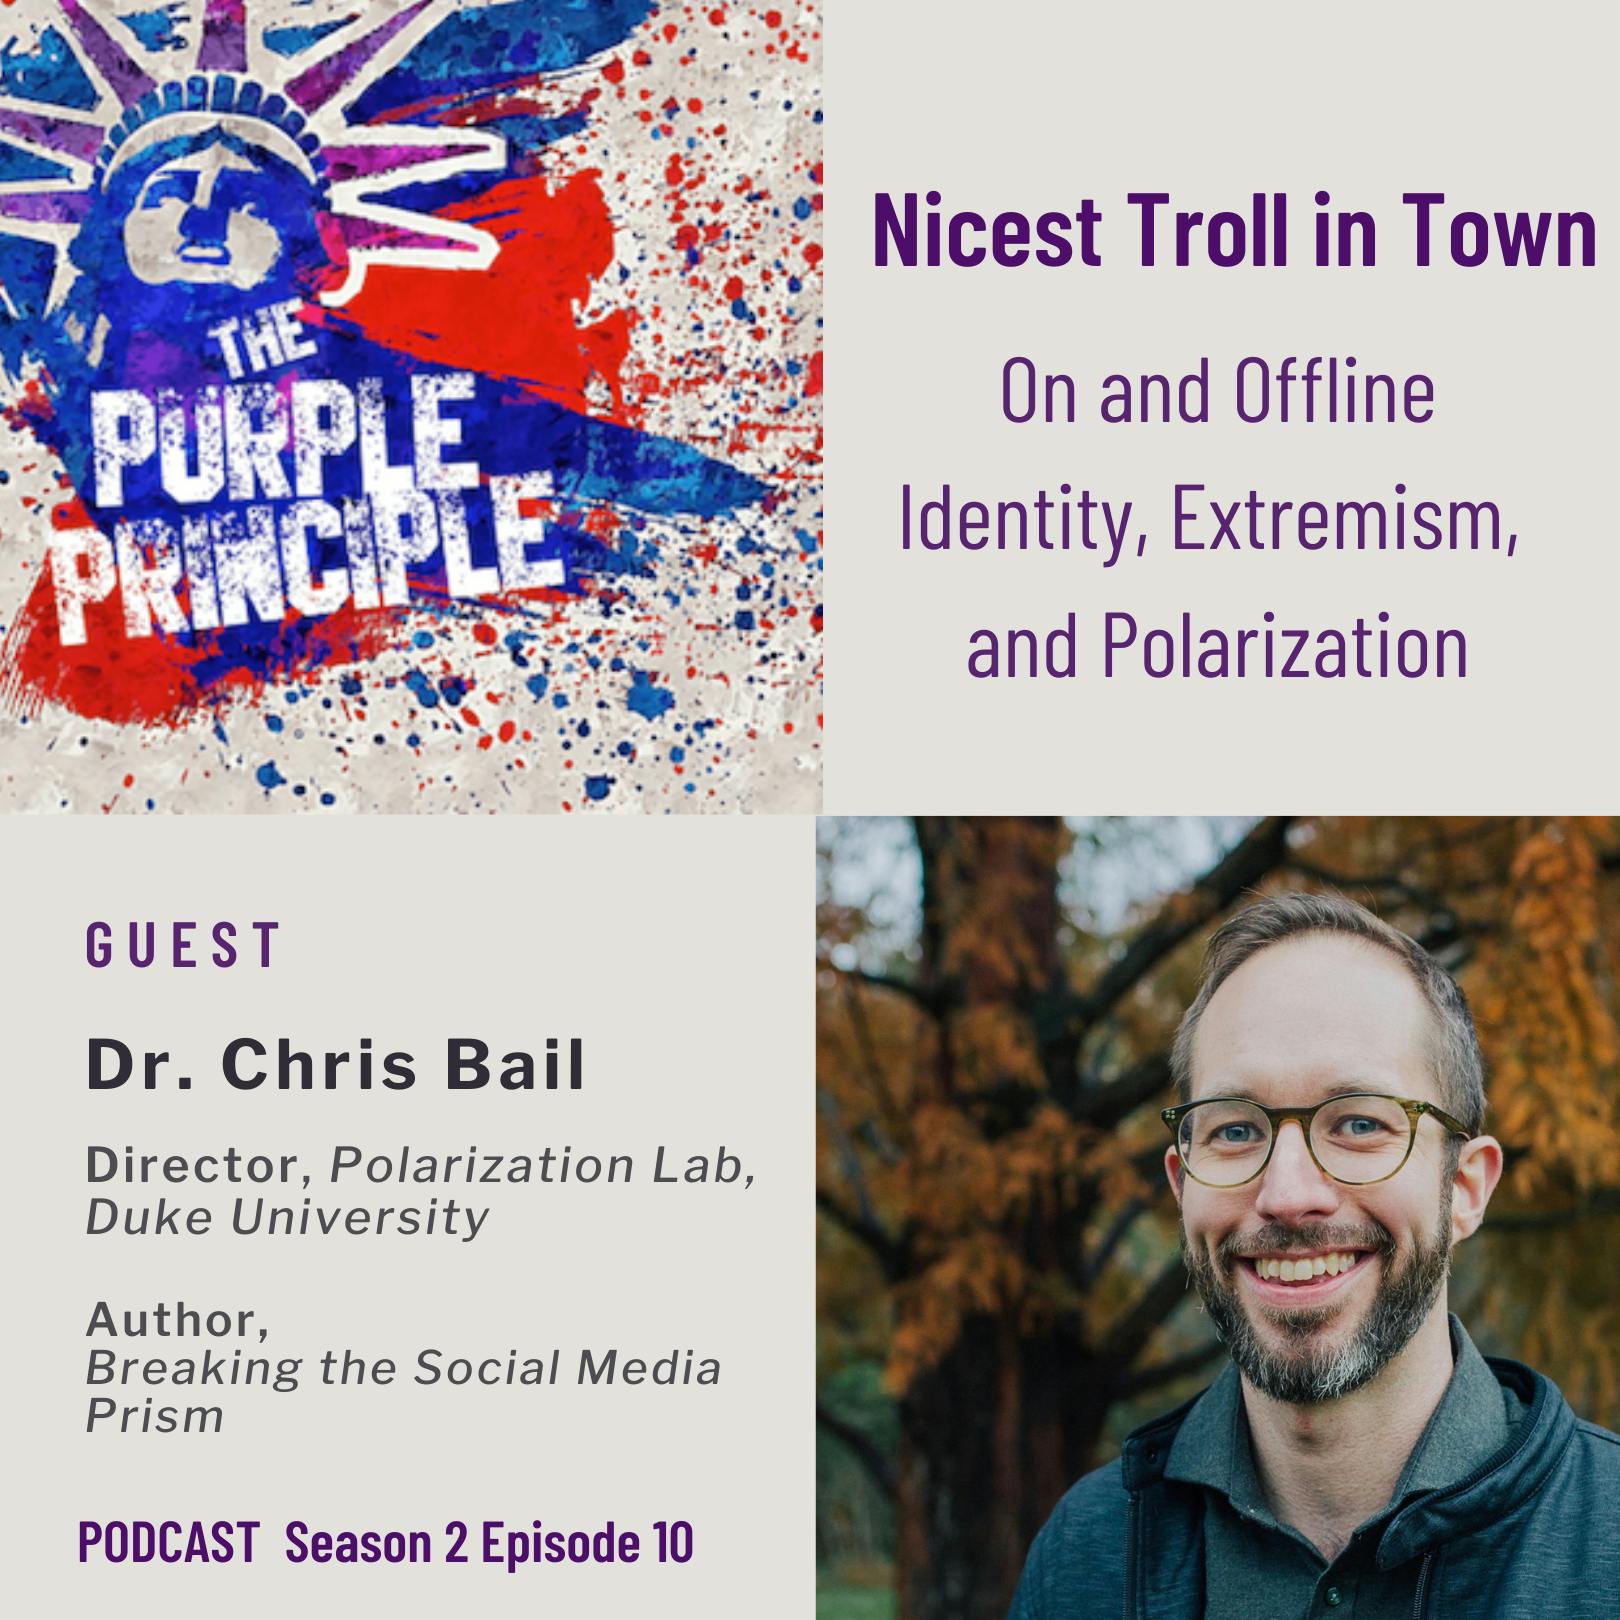 Nicest Troll in Town: On and Offline identity, Extremism, and Polarization